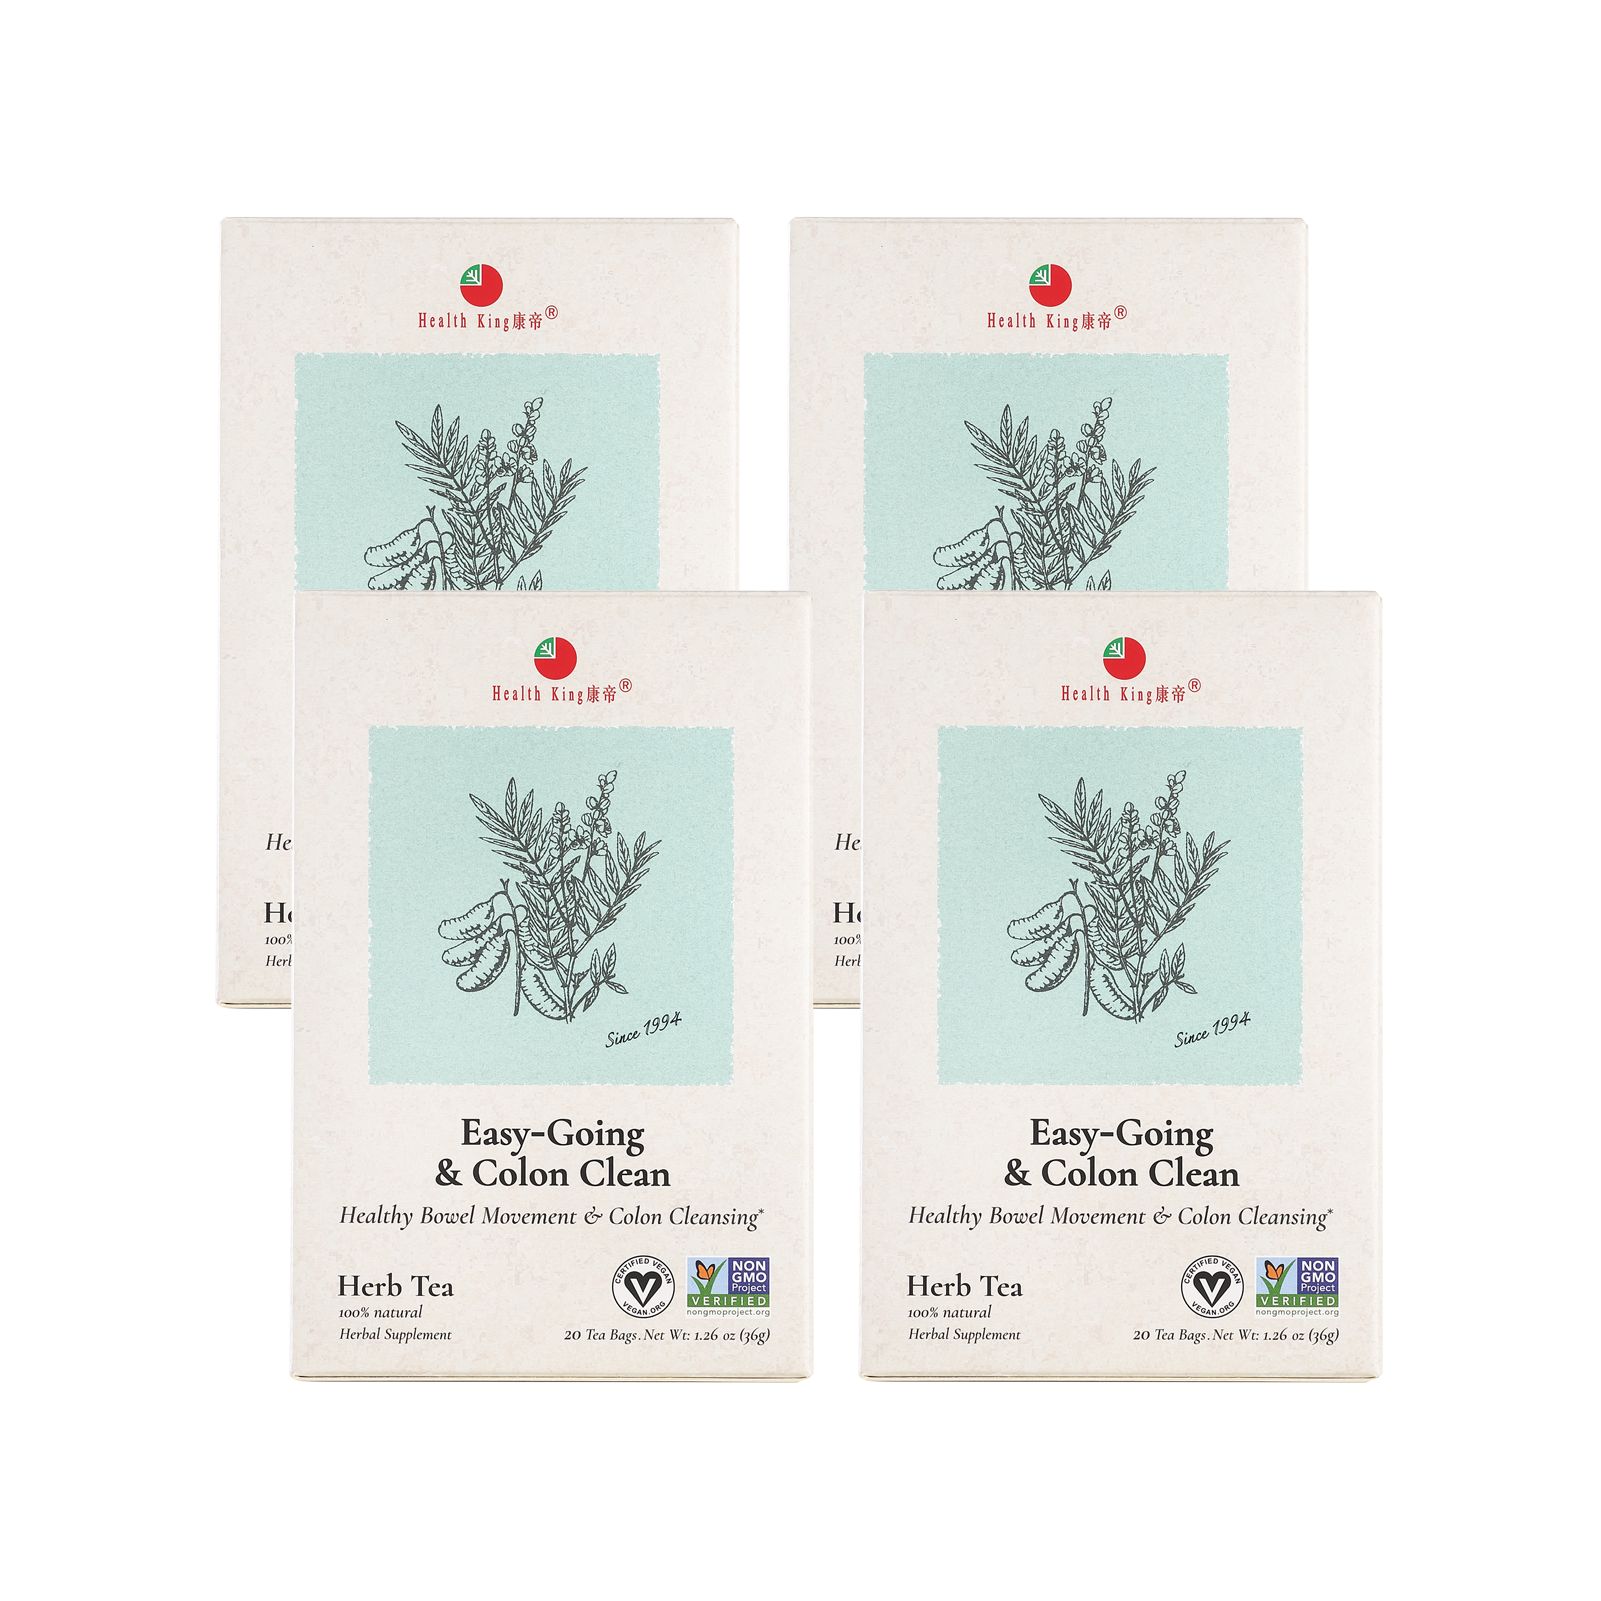 Four pack of Easy-Going & Colon Clean Herb Tea for colon cleansing